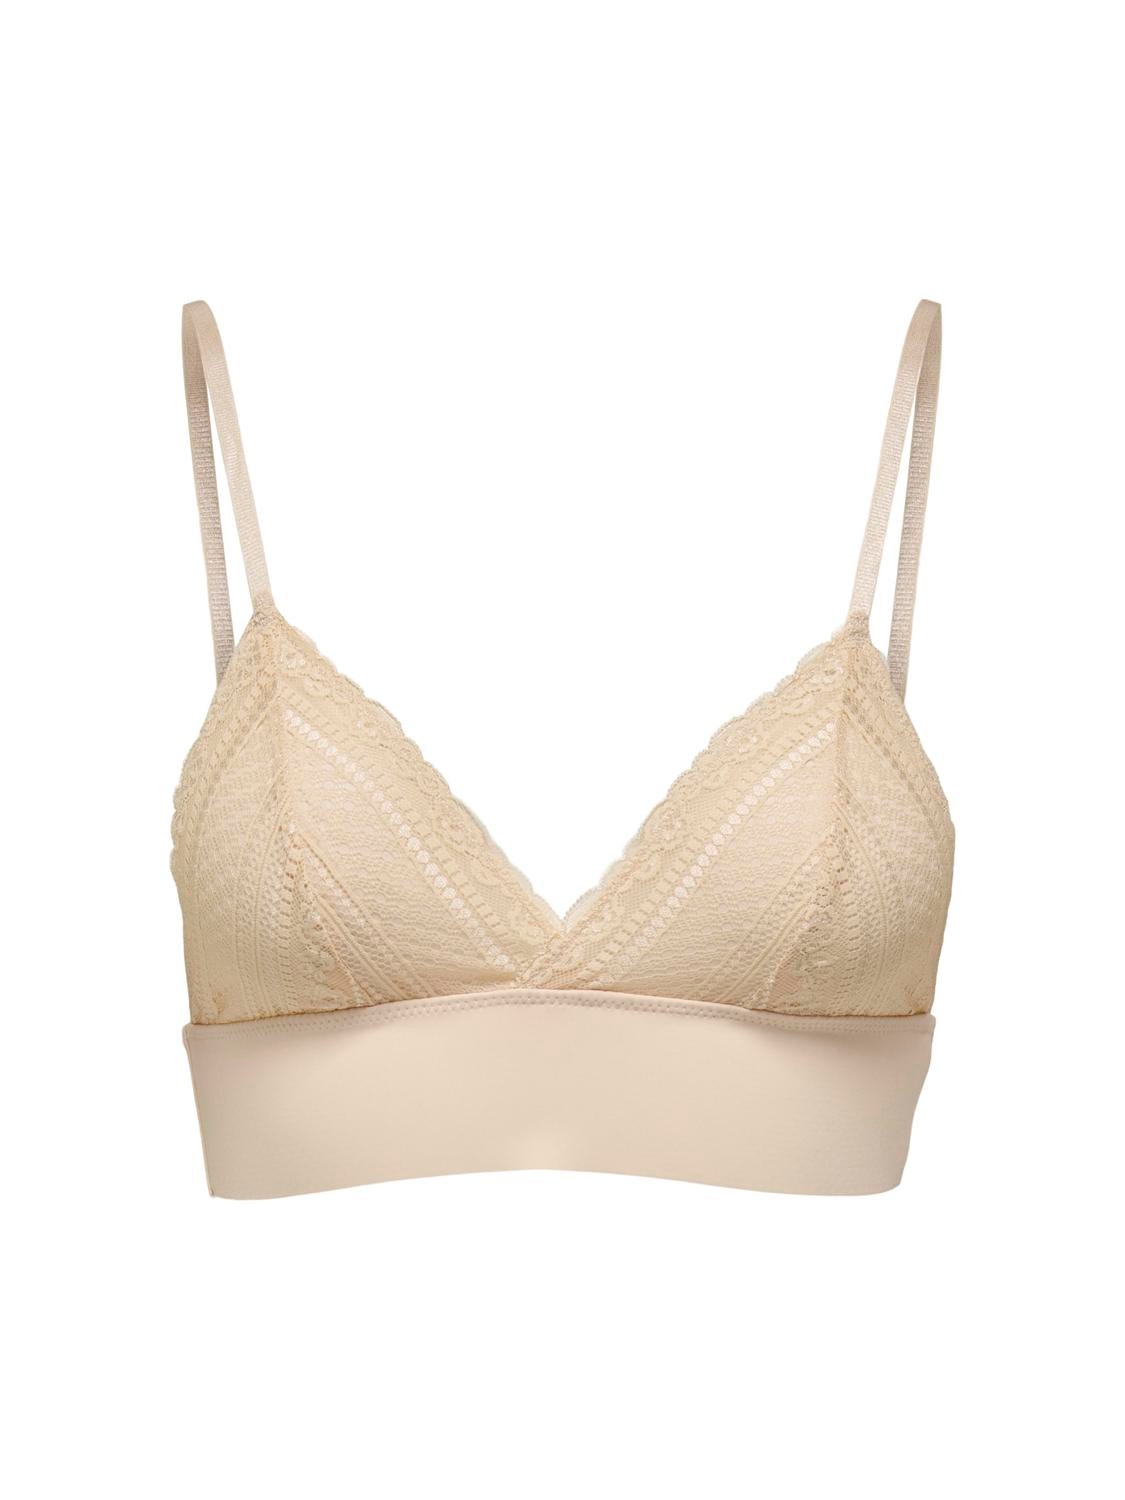 ONLY Adjustable Triangle Bra -Nude - 15283829